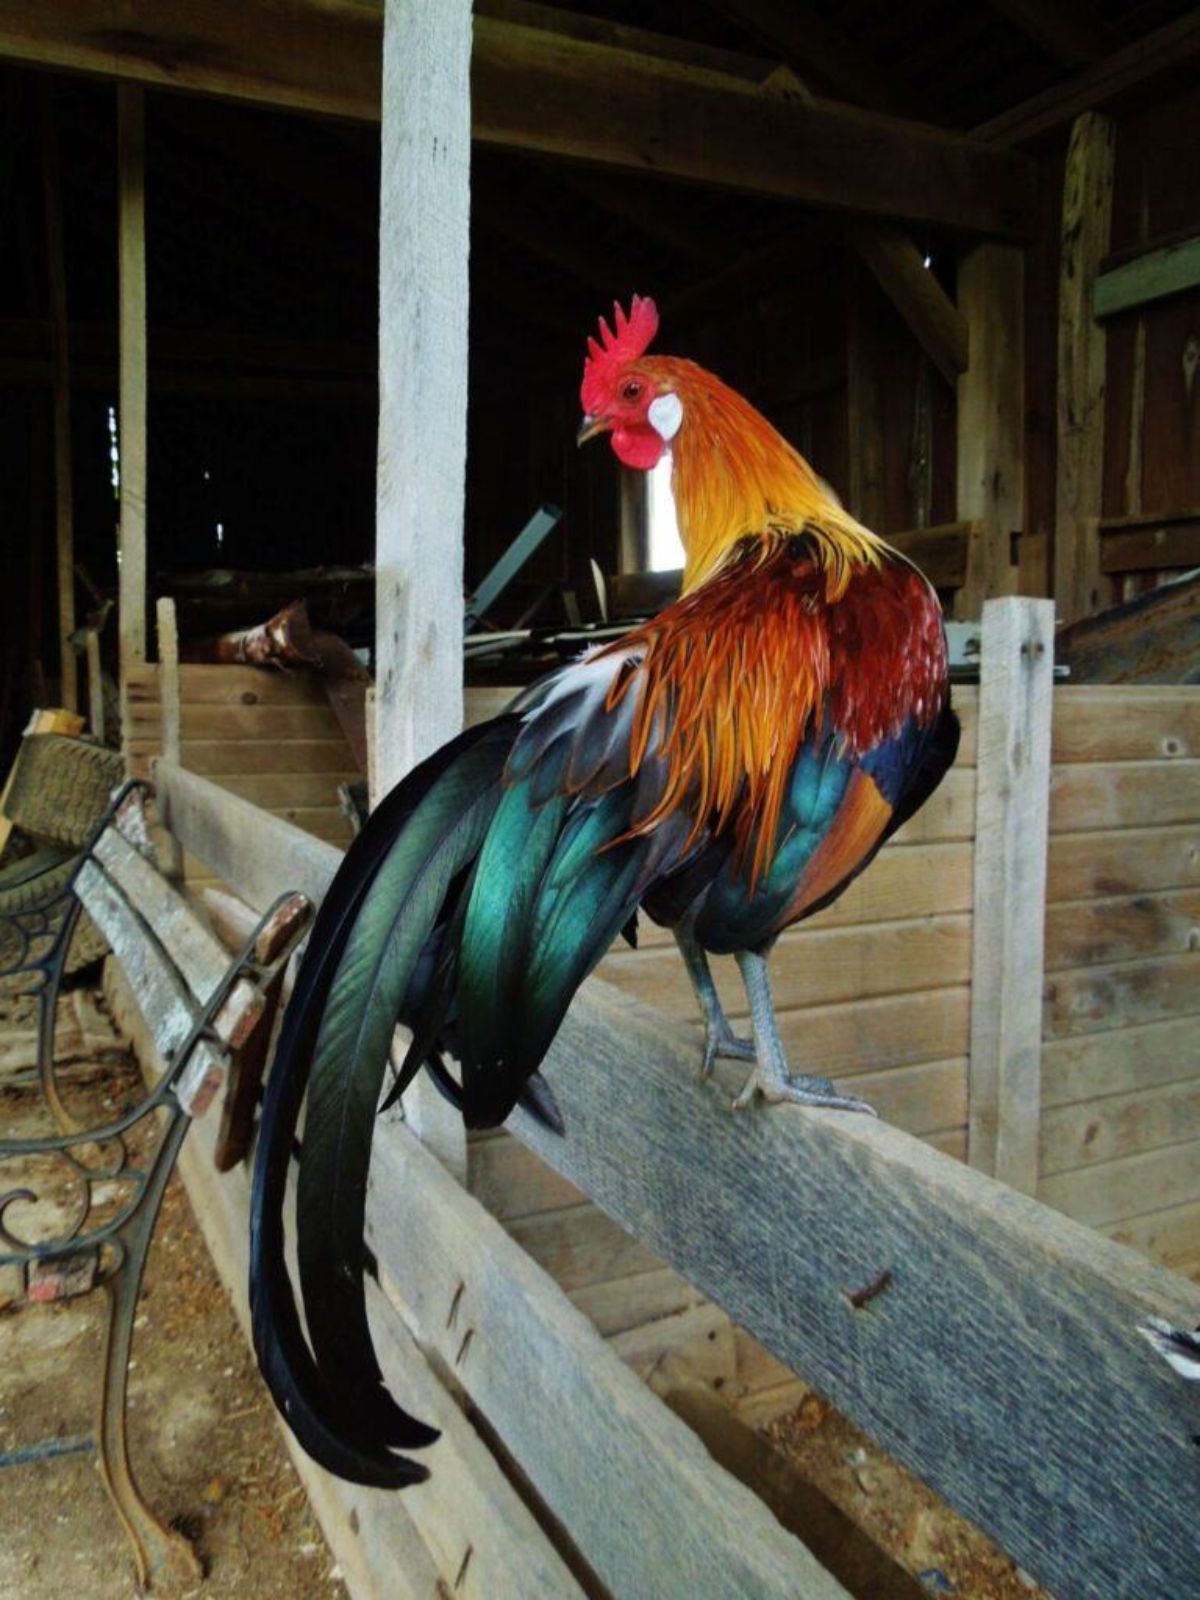 A beautiful Jangmigye rooster perched on a wooden fence.